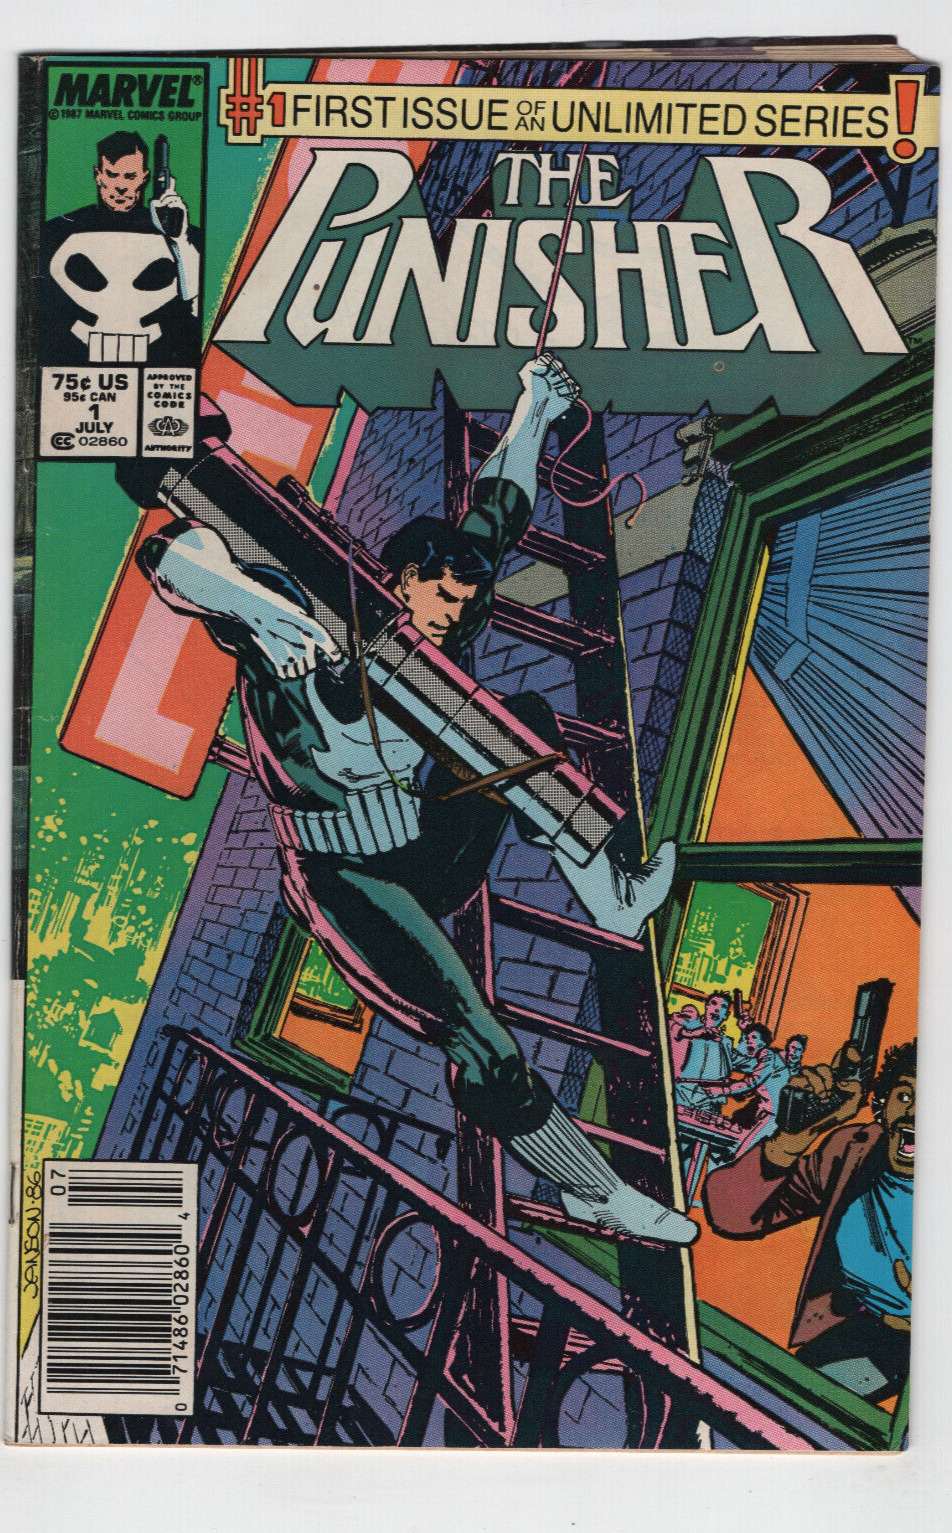 THE PUNISHER #1 1ST ONGOING SOLO SERIES MARVEL COMICS 1987 DAREDEVIL NEWSSTAND